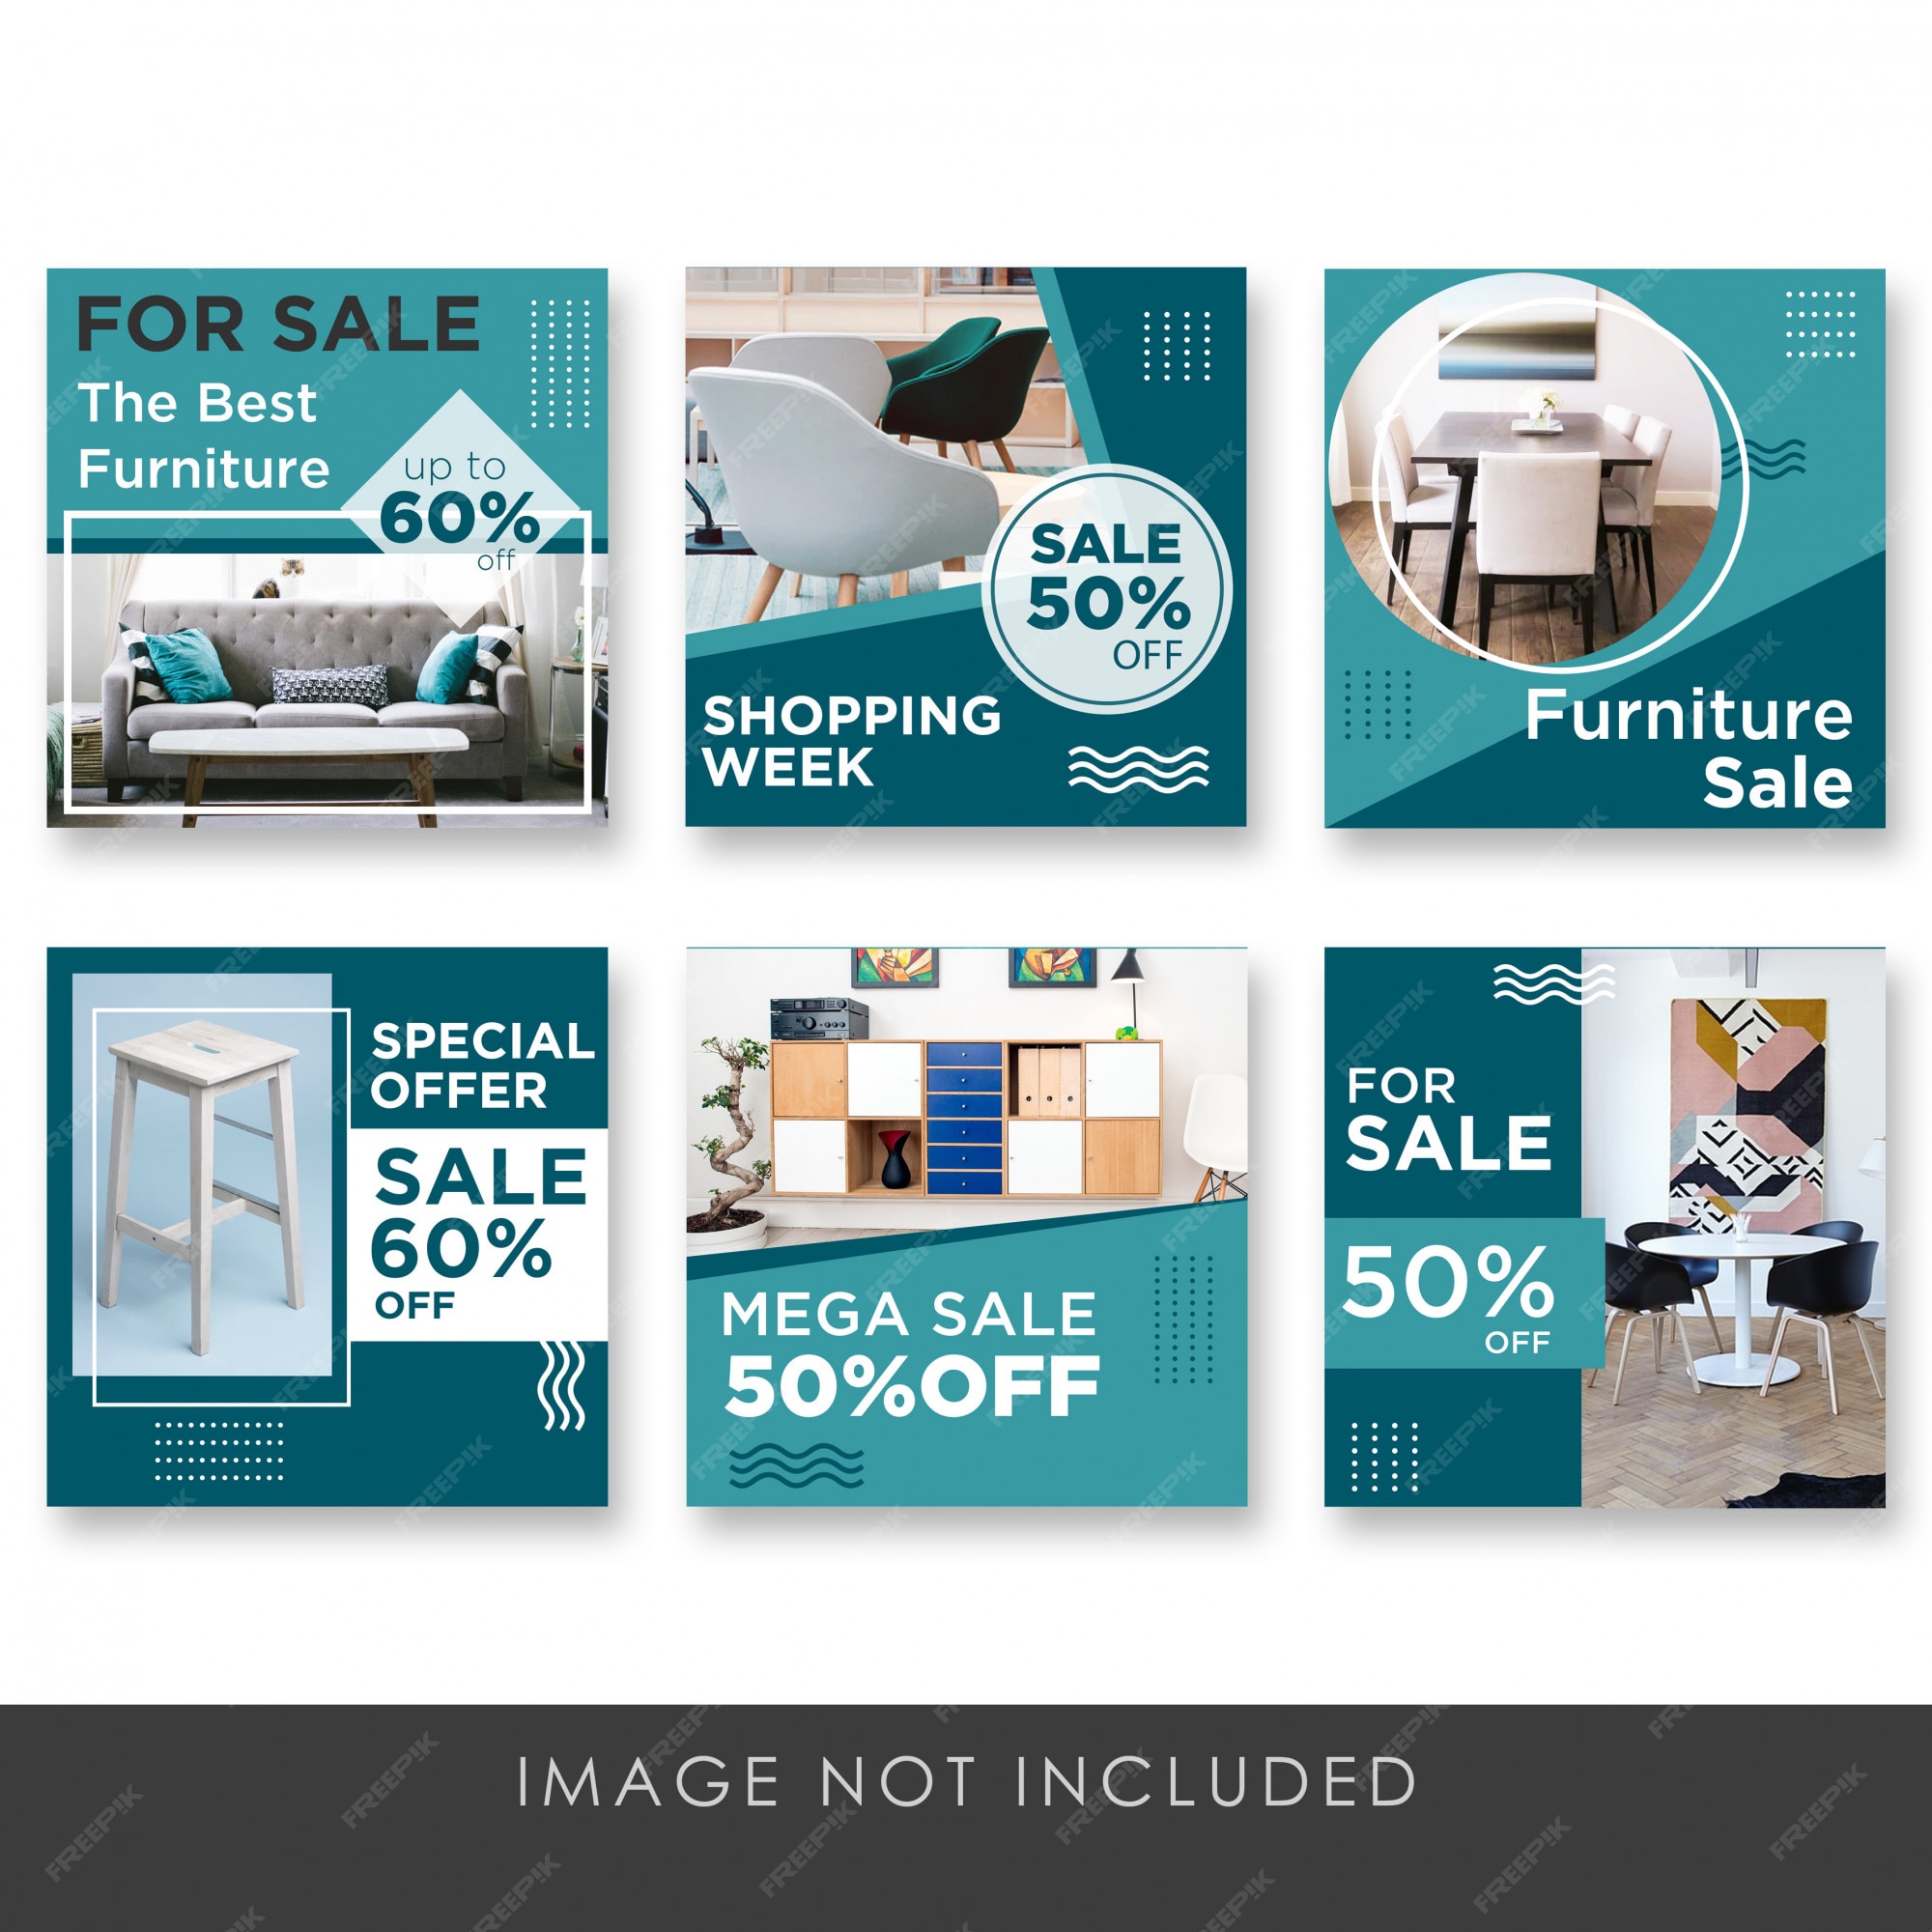 Premium PSD | Social media post sale for all furniture collection template